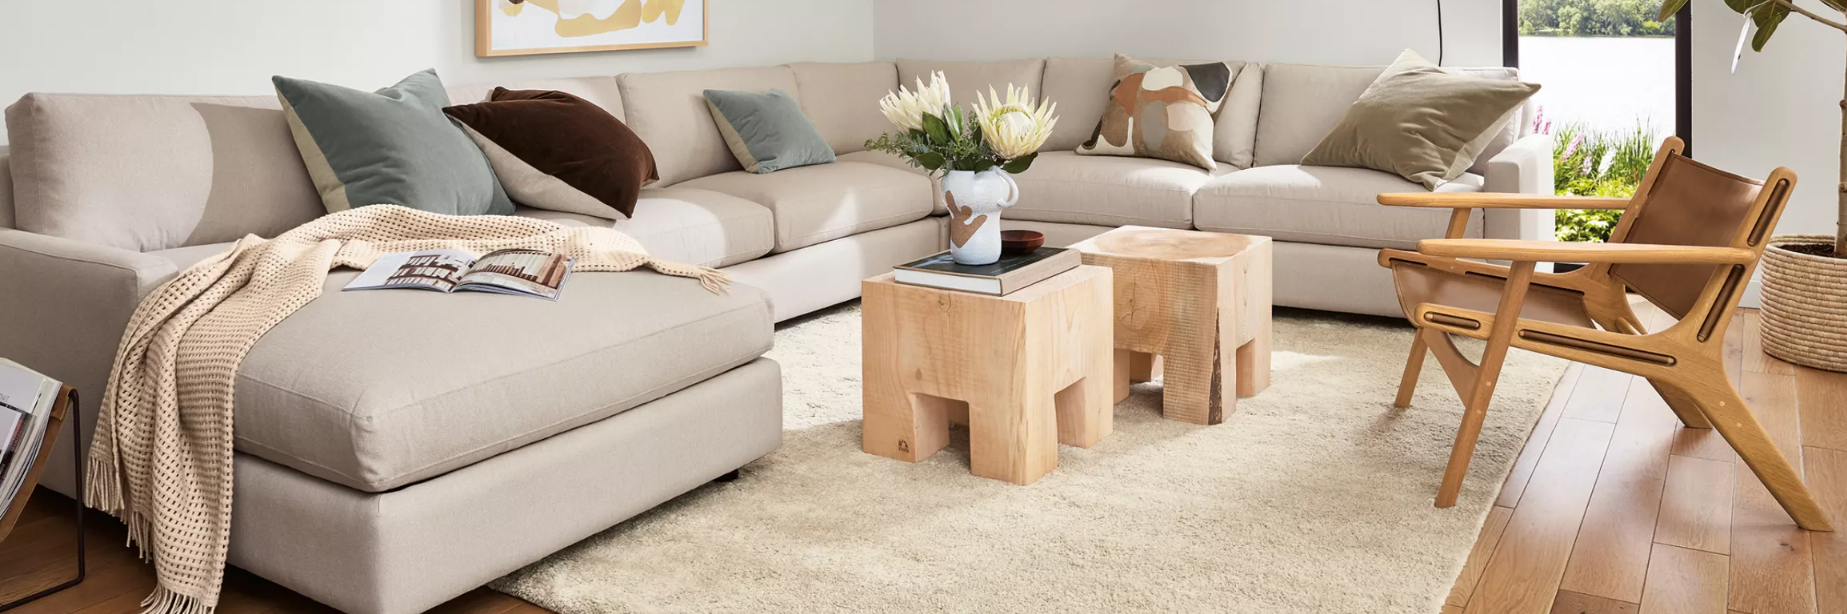 Modern furniture from Room & Board in a stylish living room setting